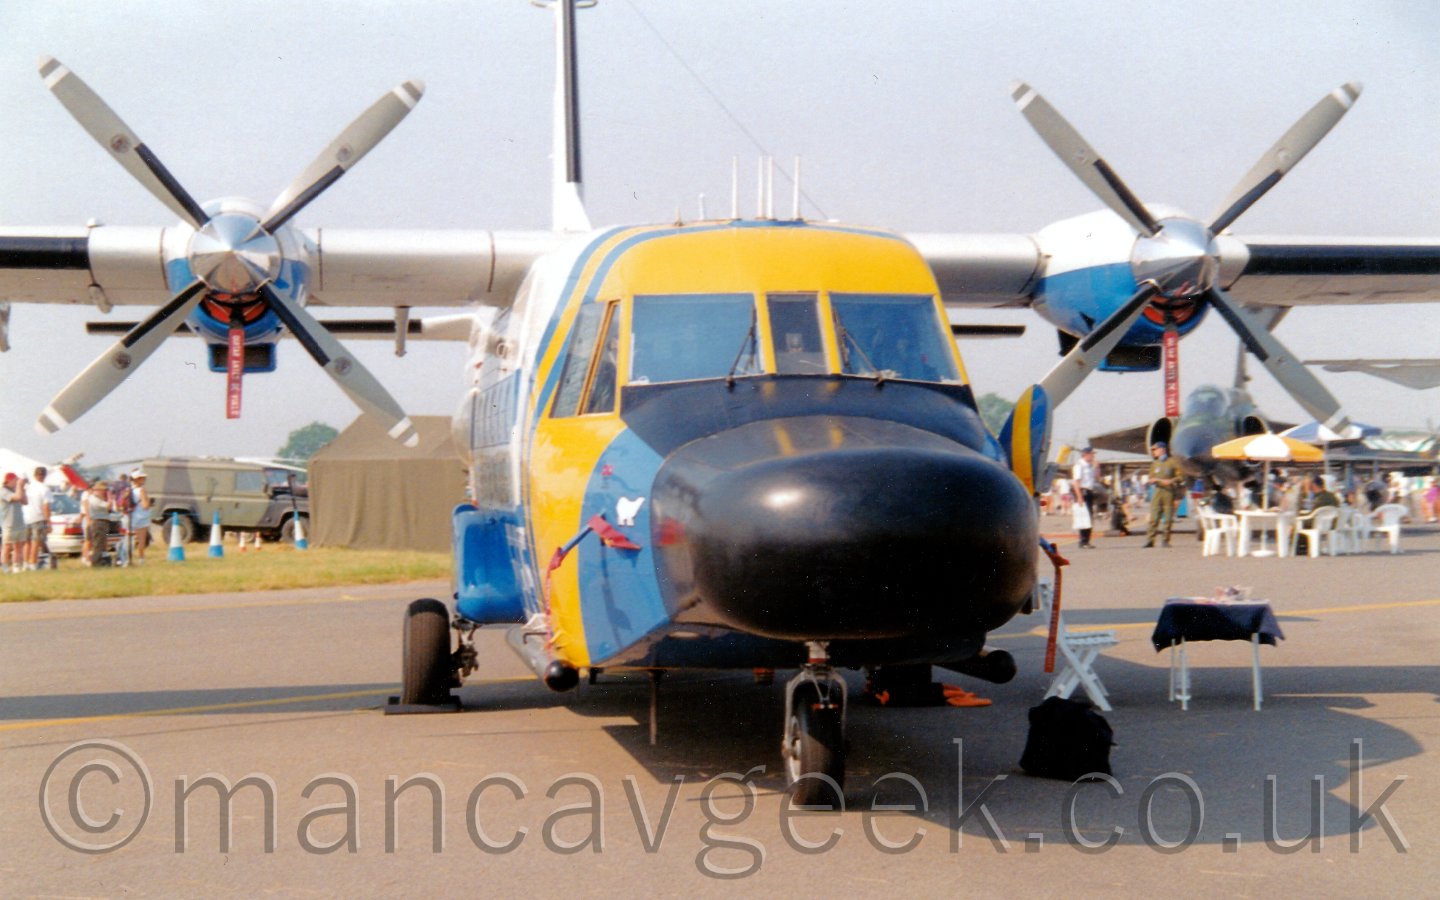 Front view of a high-winged, twin propellor engined transport aircraft, facing slightly to the right of the camera. The plane plane is mostly white, with blue and yellow bands around the forward fuselage. The nose has a big radome, painted black, looking a bit like a duck's beak. There are pods on the side of the lower rear fuselage for the main landing gear. In the baclkground, small crowds of people are walking around, looking at some of the other exhibits, including a jet fighter aircraft under this plane's wing, under a pale grey sky.